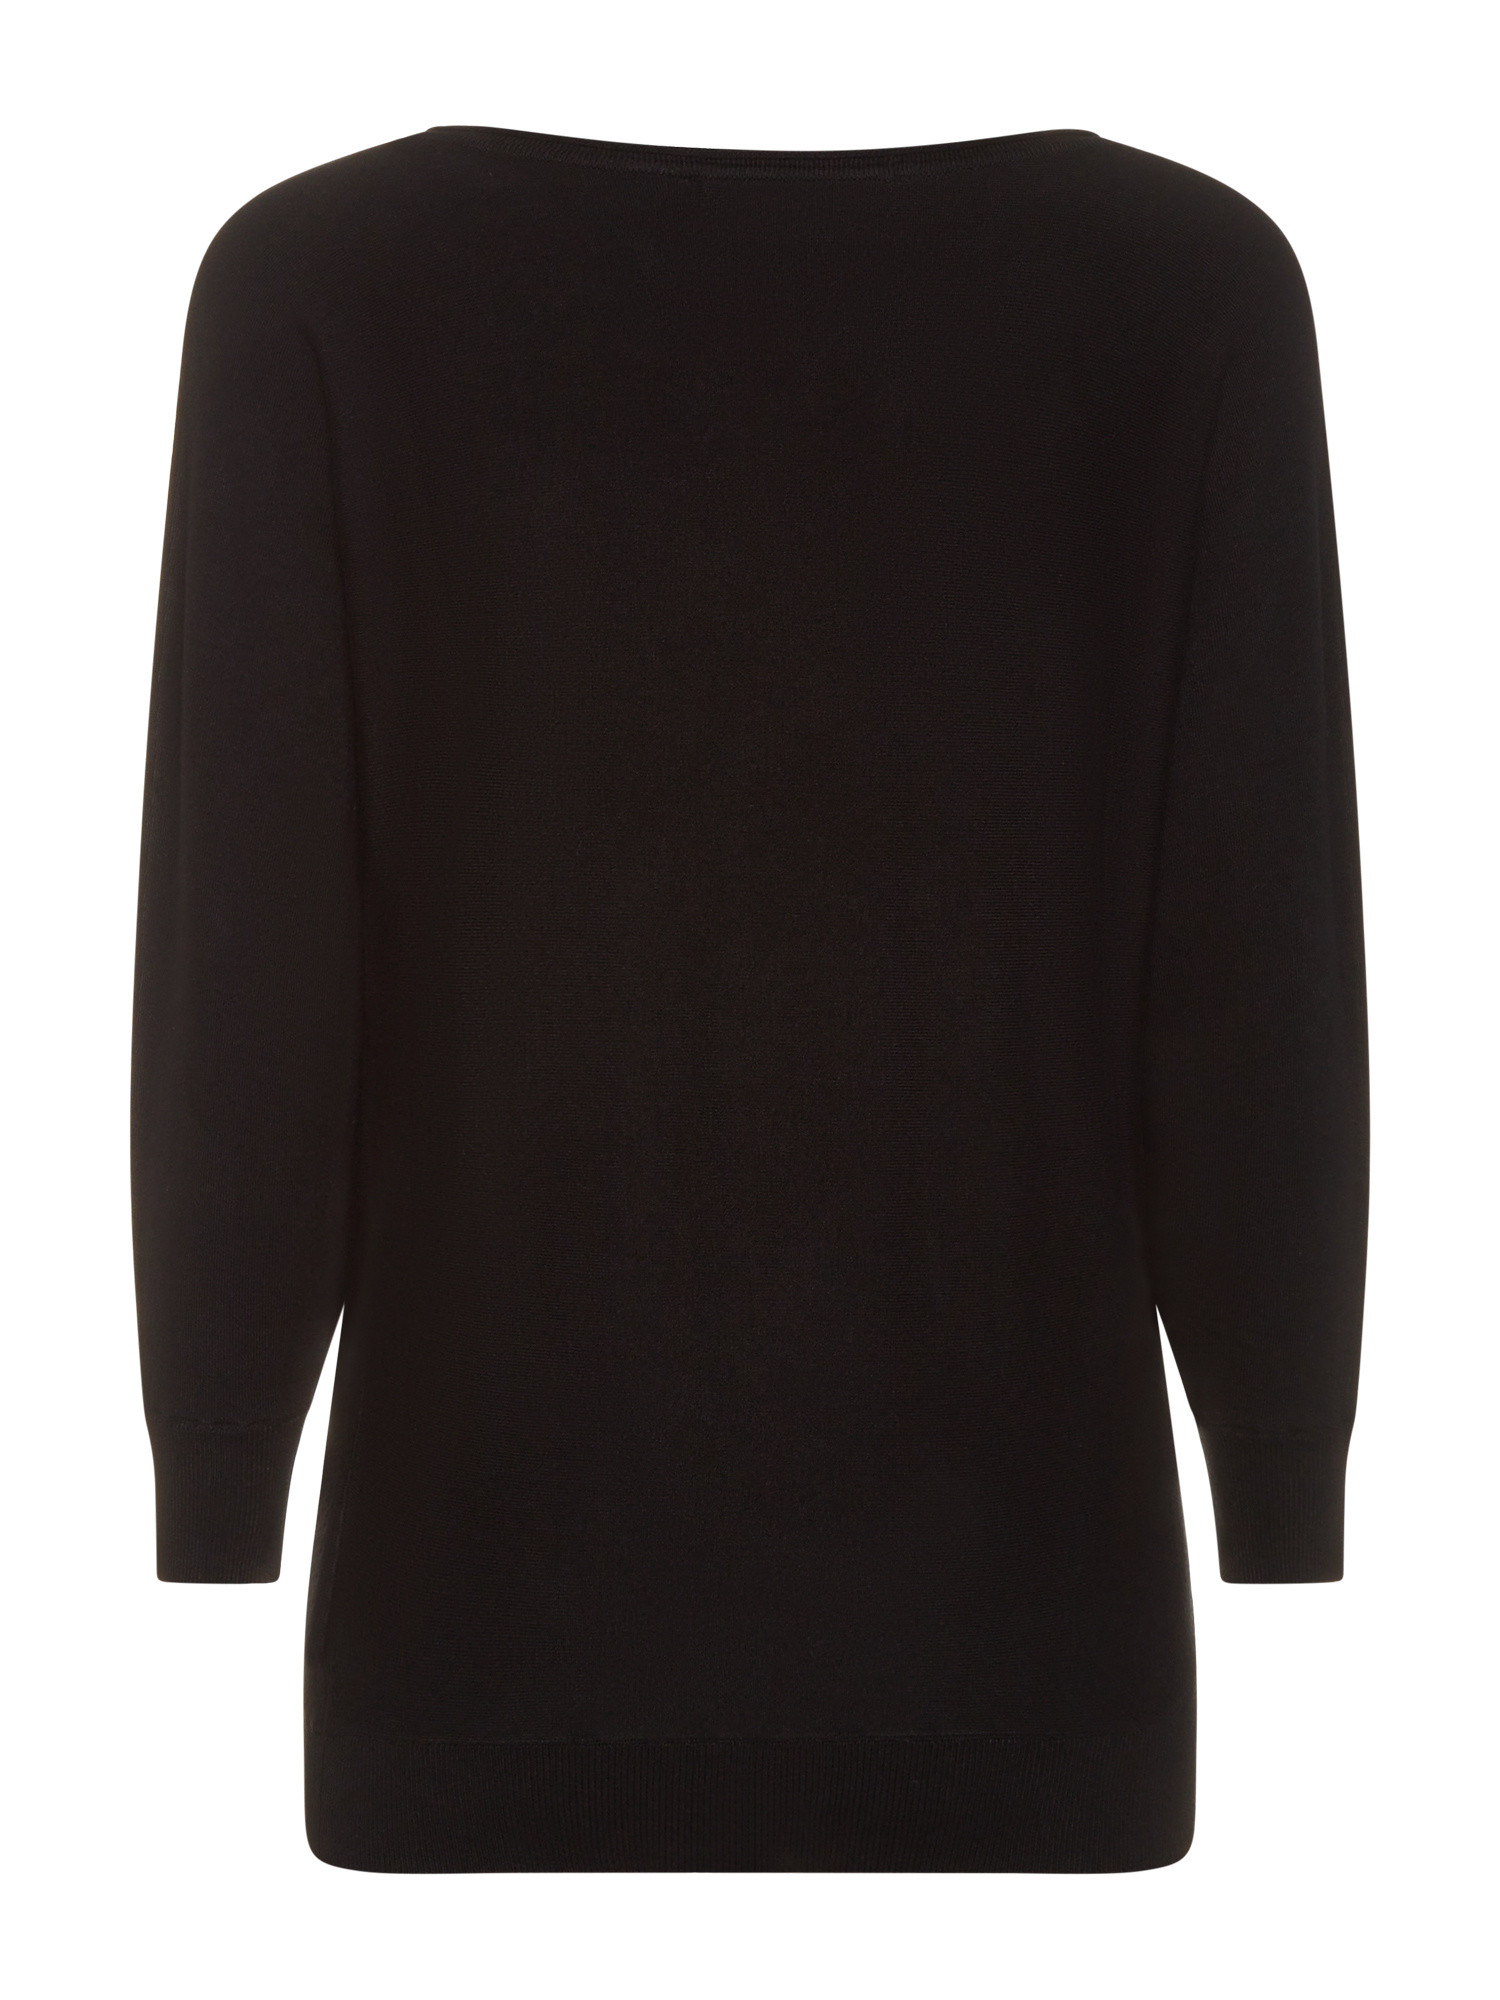 Guess - Sweater with logo, Black, large image number 1